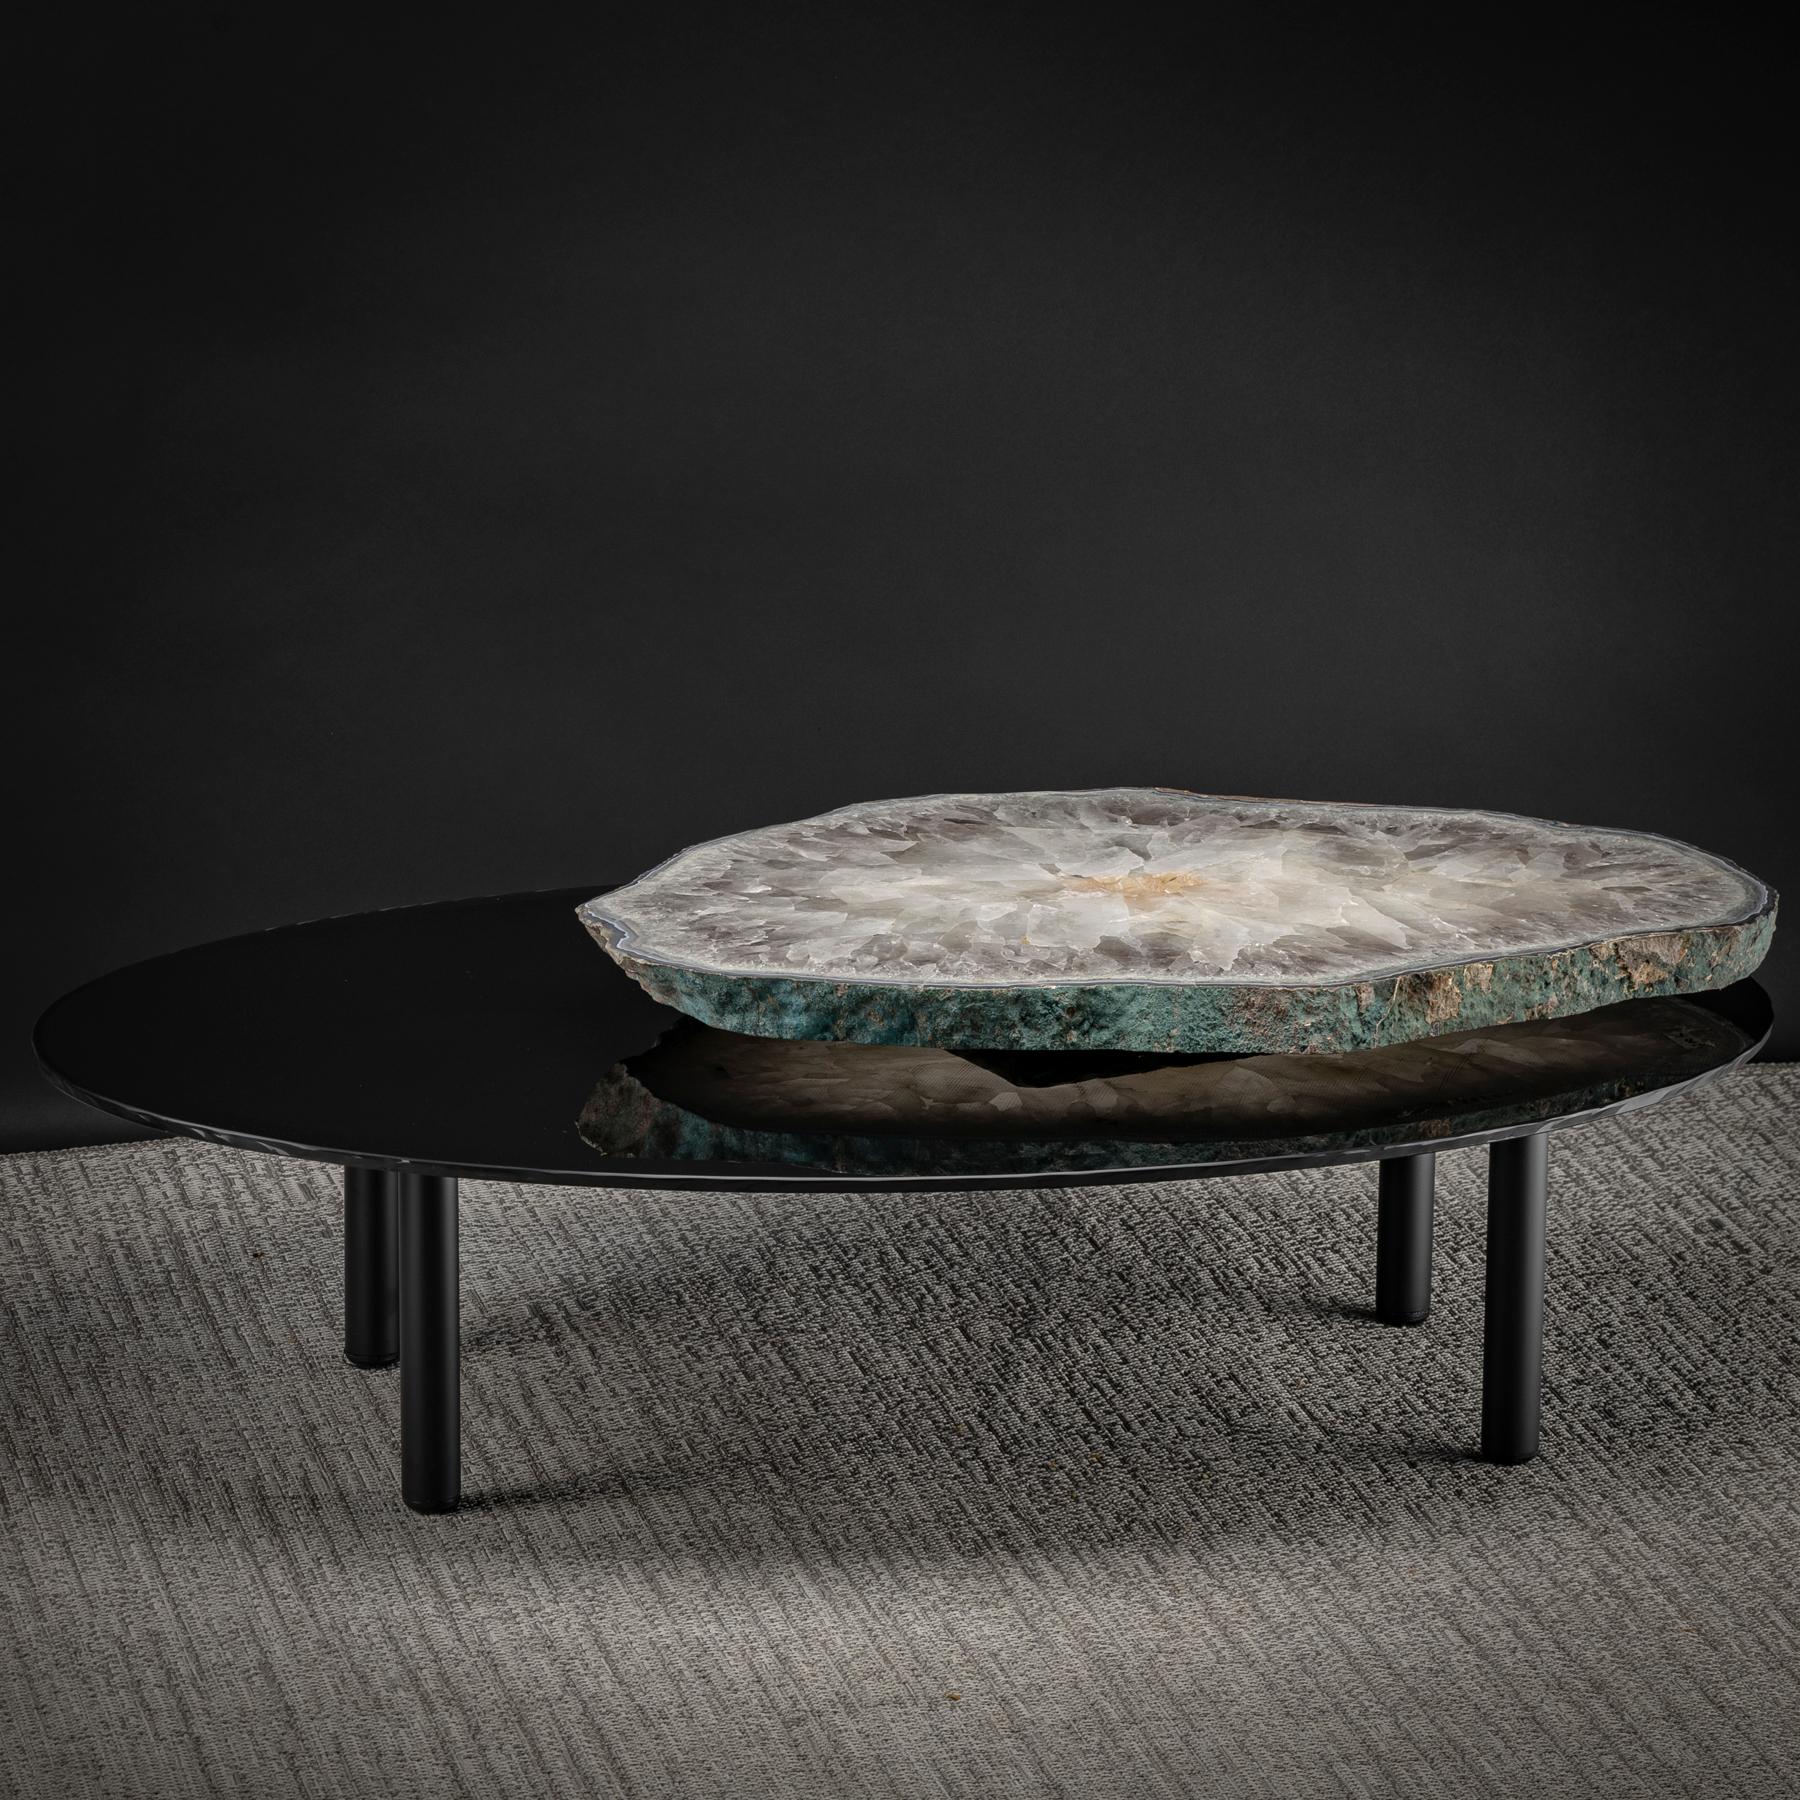 Organic Modern Center Table, with Rotating Brazilian Agate on Black Tempered Glass